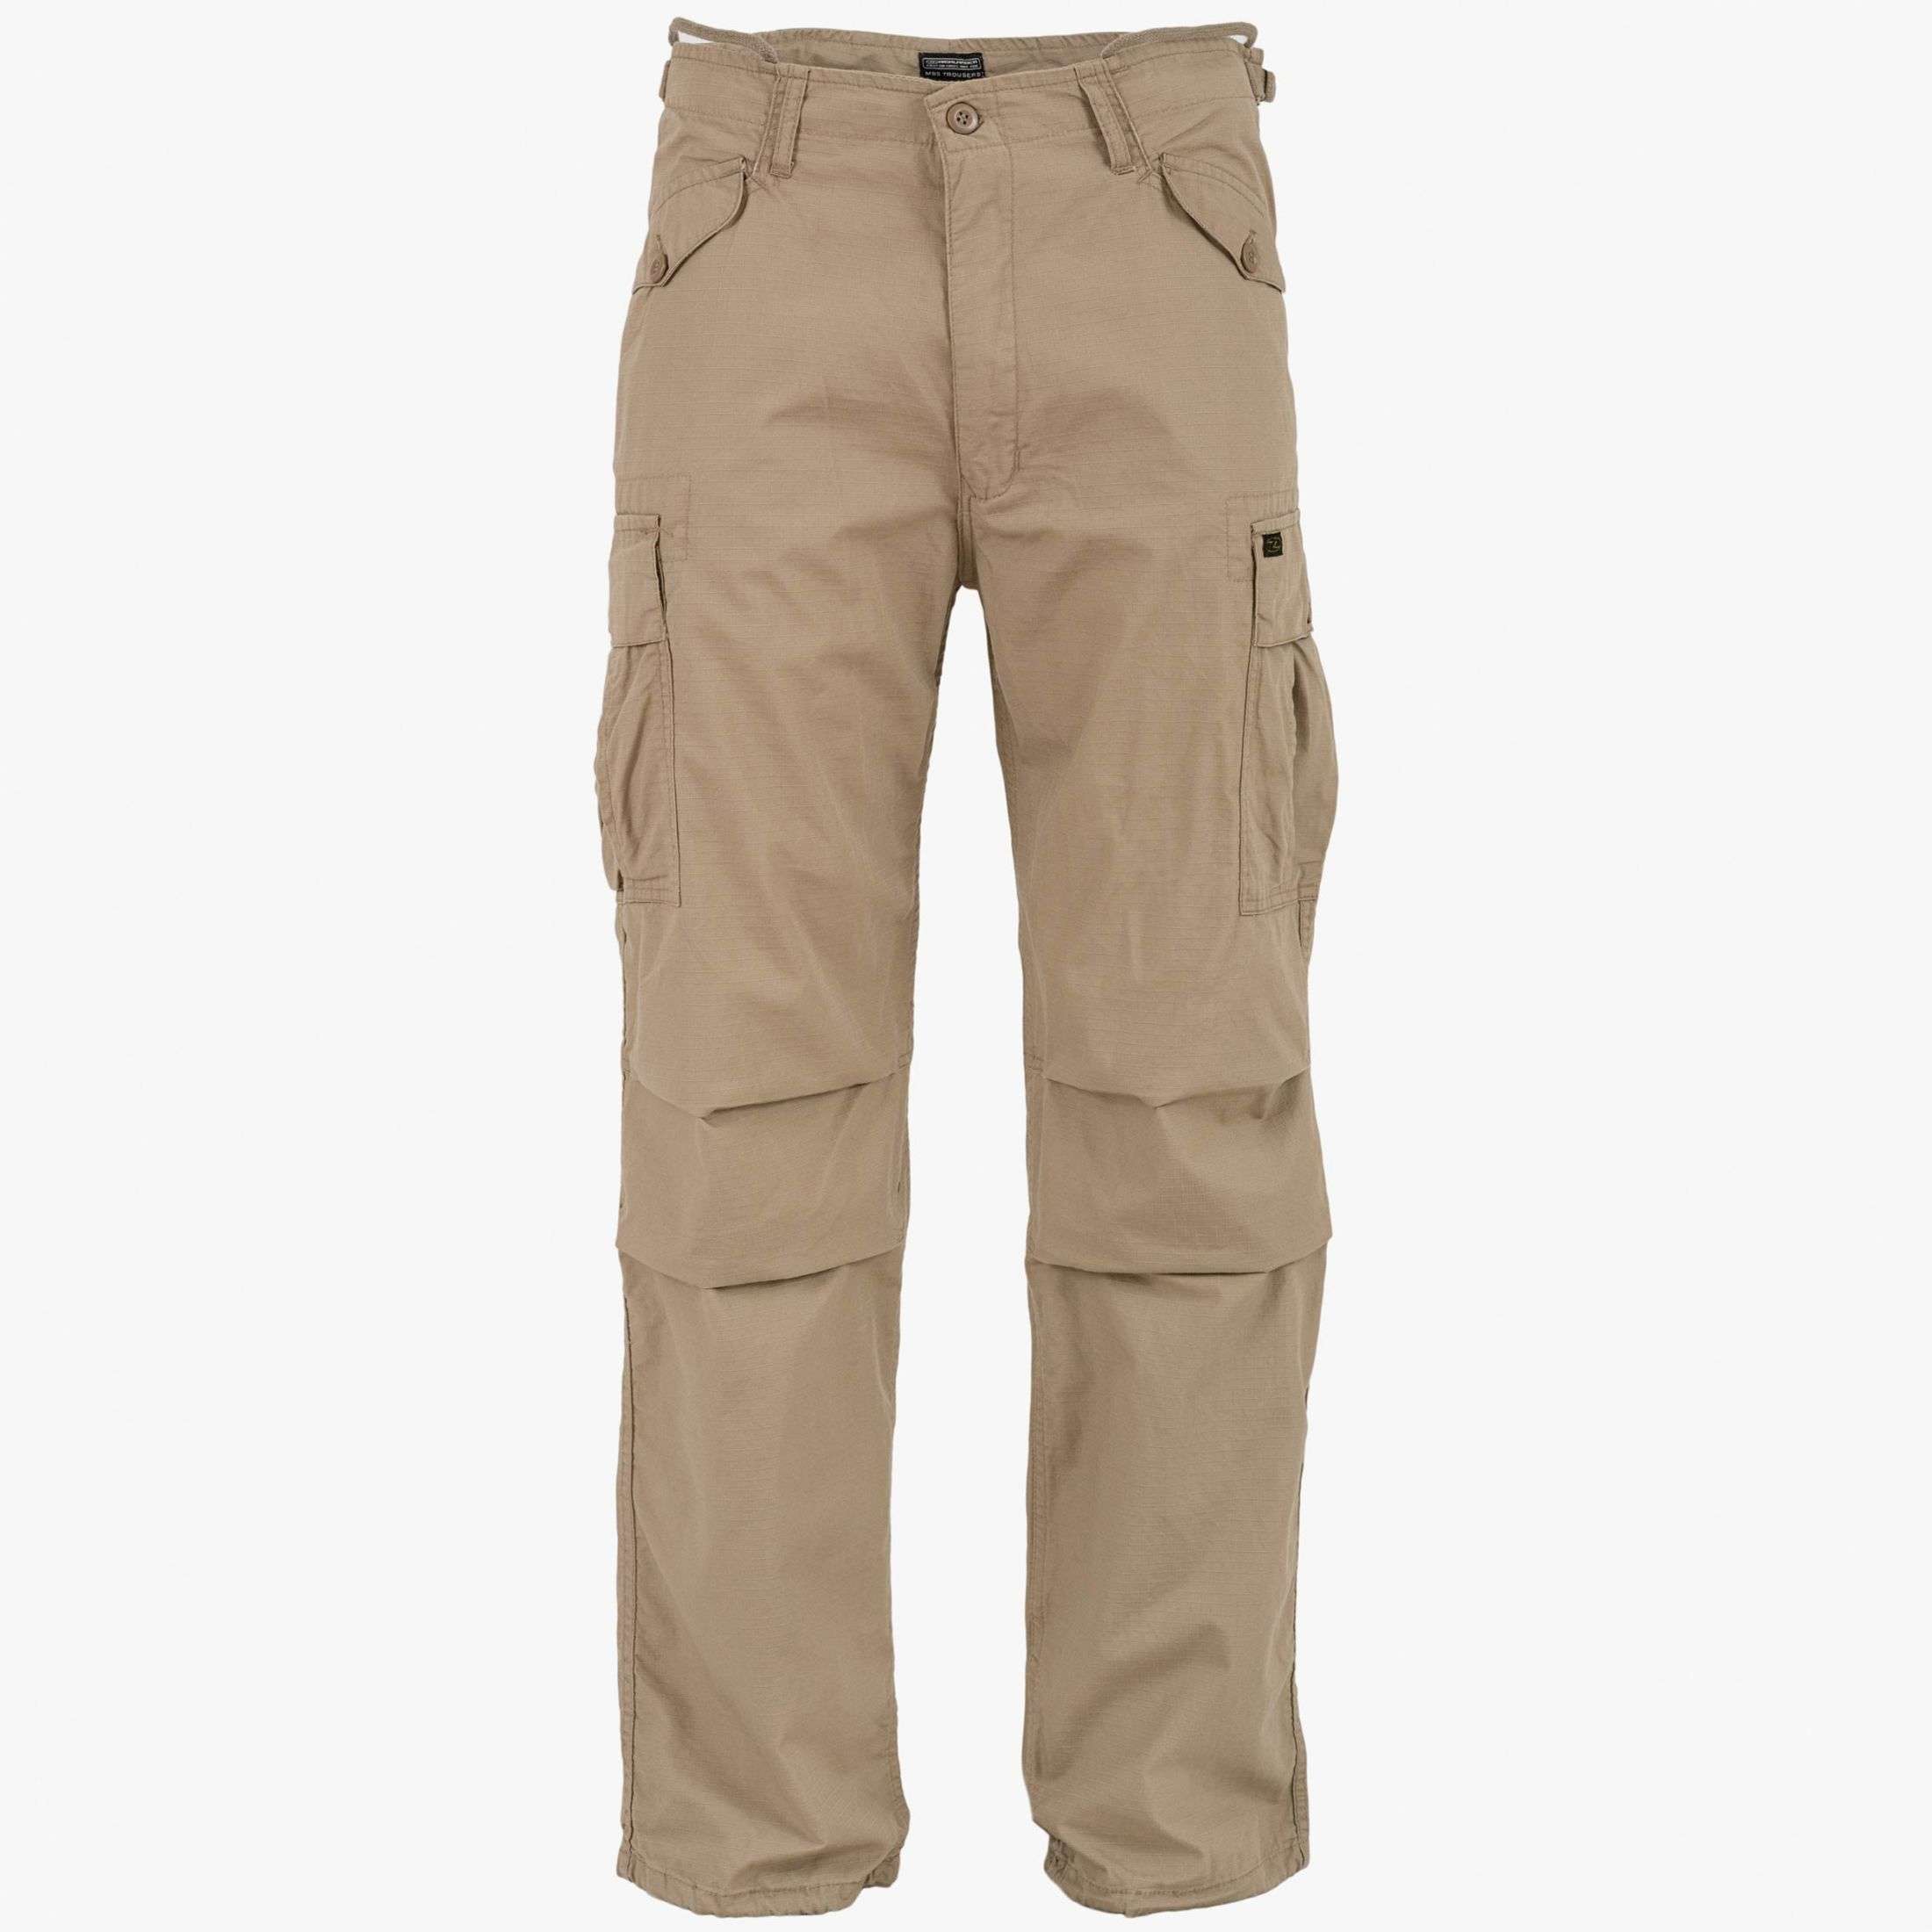 Highlander, Highlander M65 Trousers, Trousers & Shorts,Wylies Outdoor World,